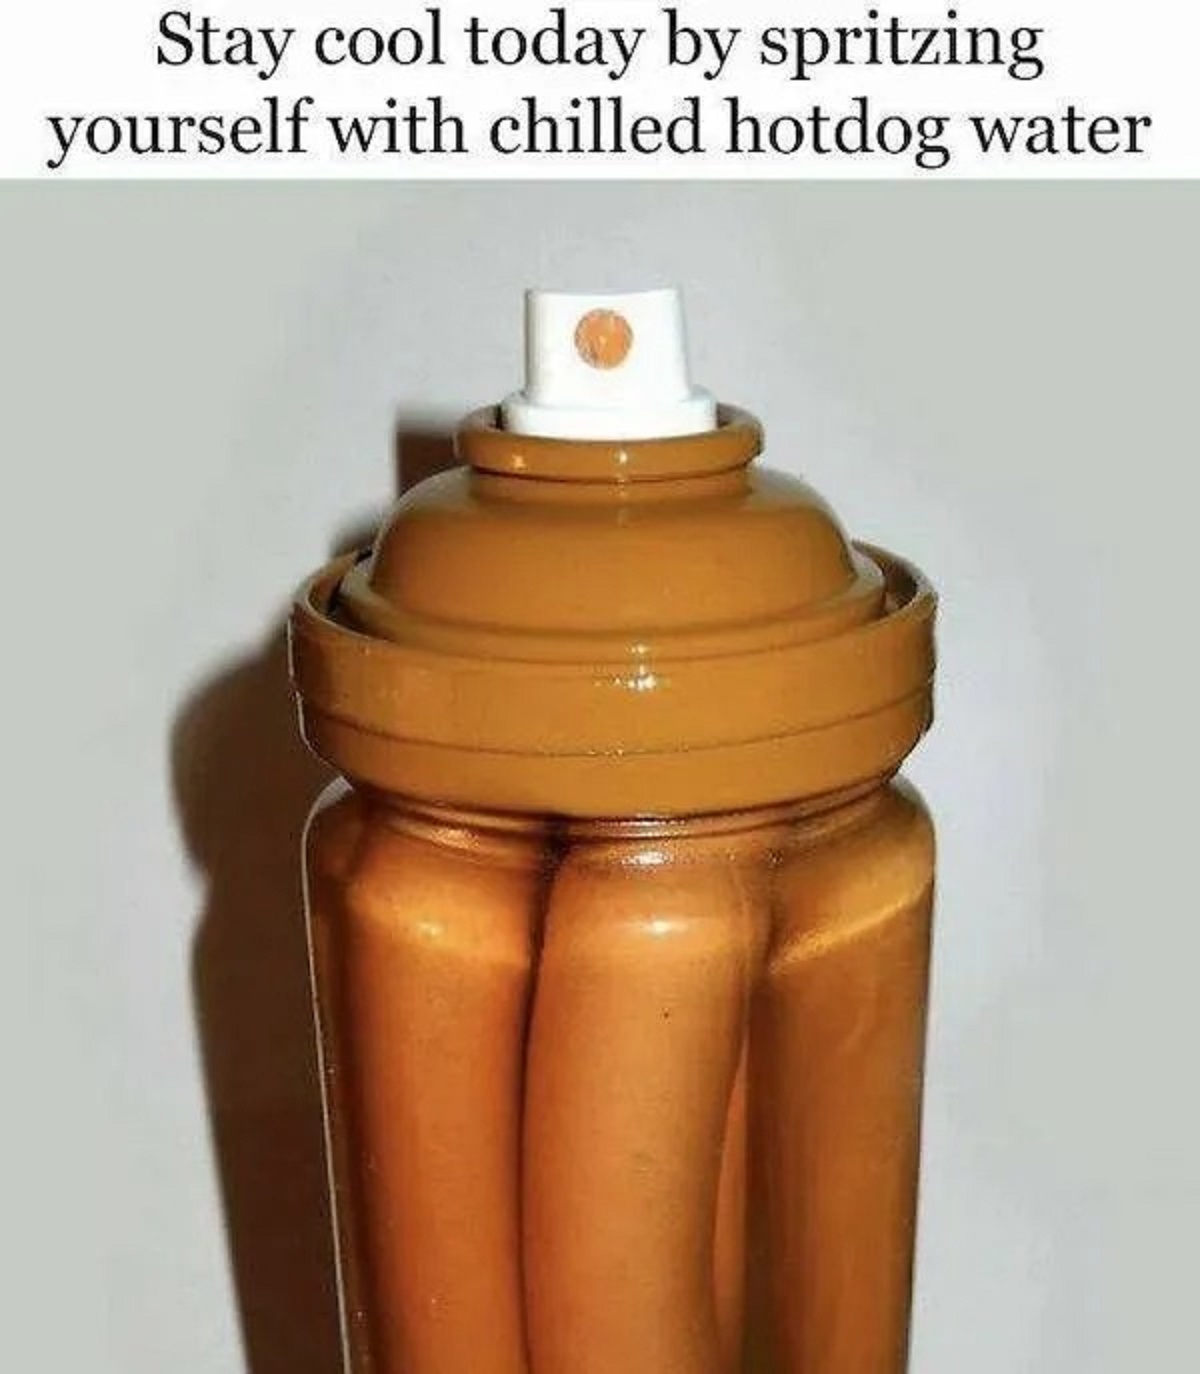 hot dog water meme - Stay cool today by spritzing yourself with chilled hotdog water